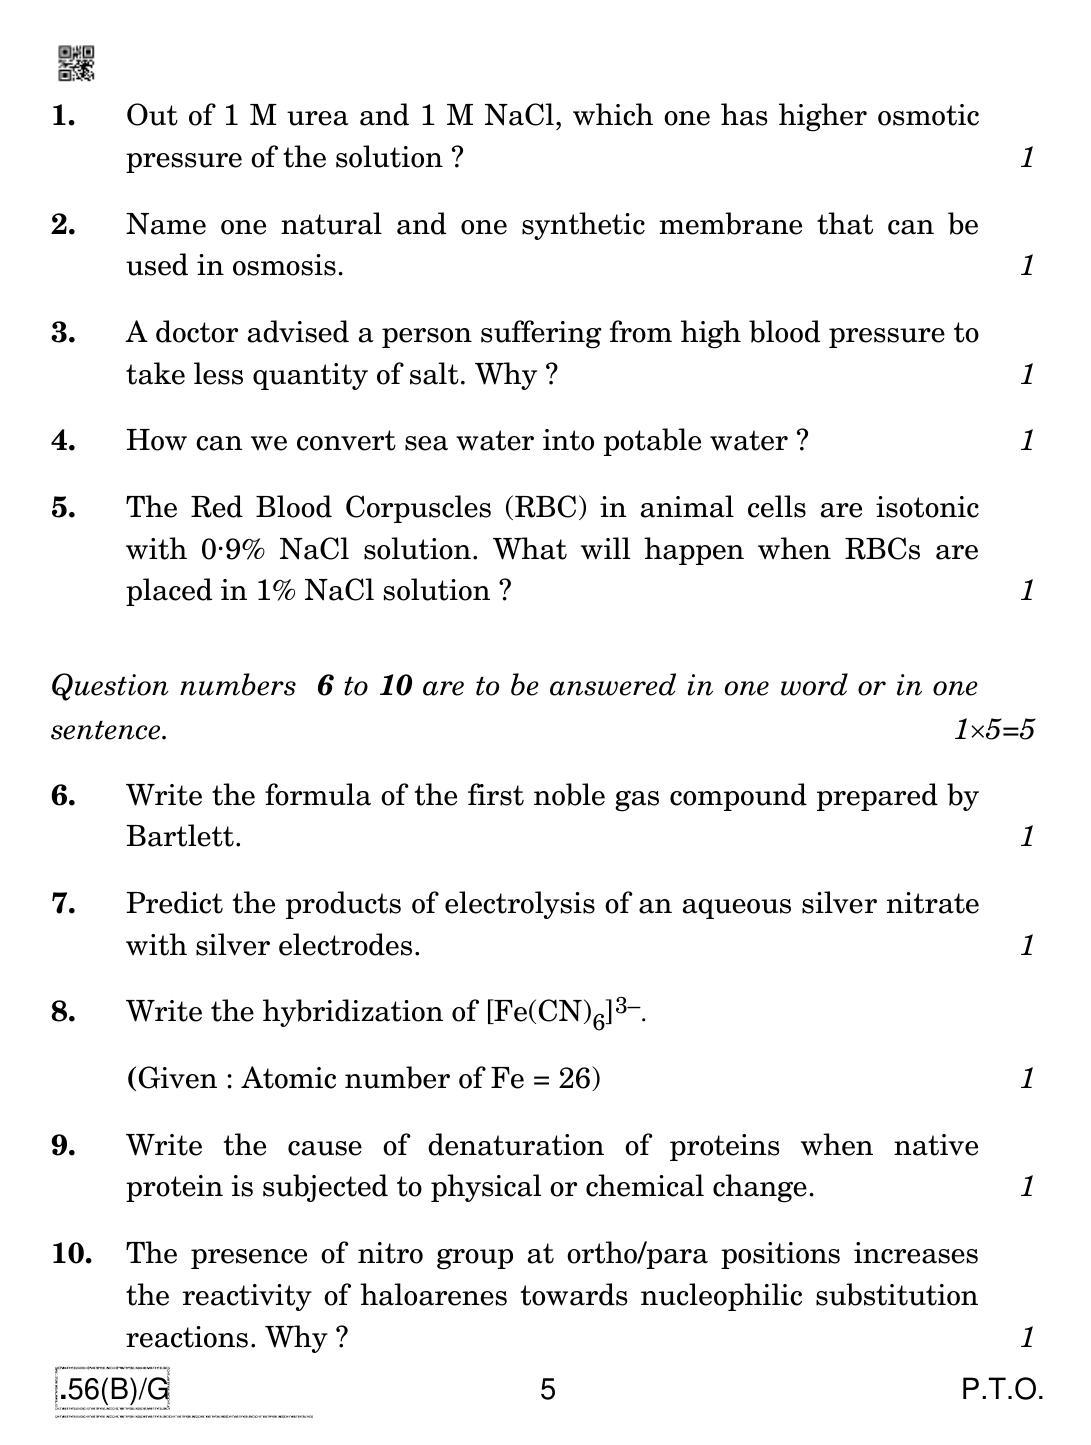 CBSE Class 12 56(B)-C - Chemistry For Blind Candidates 2020 Compartment Question Paper - Page 5